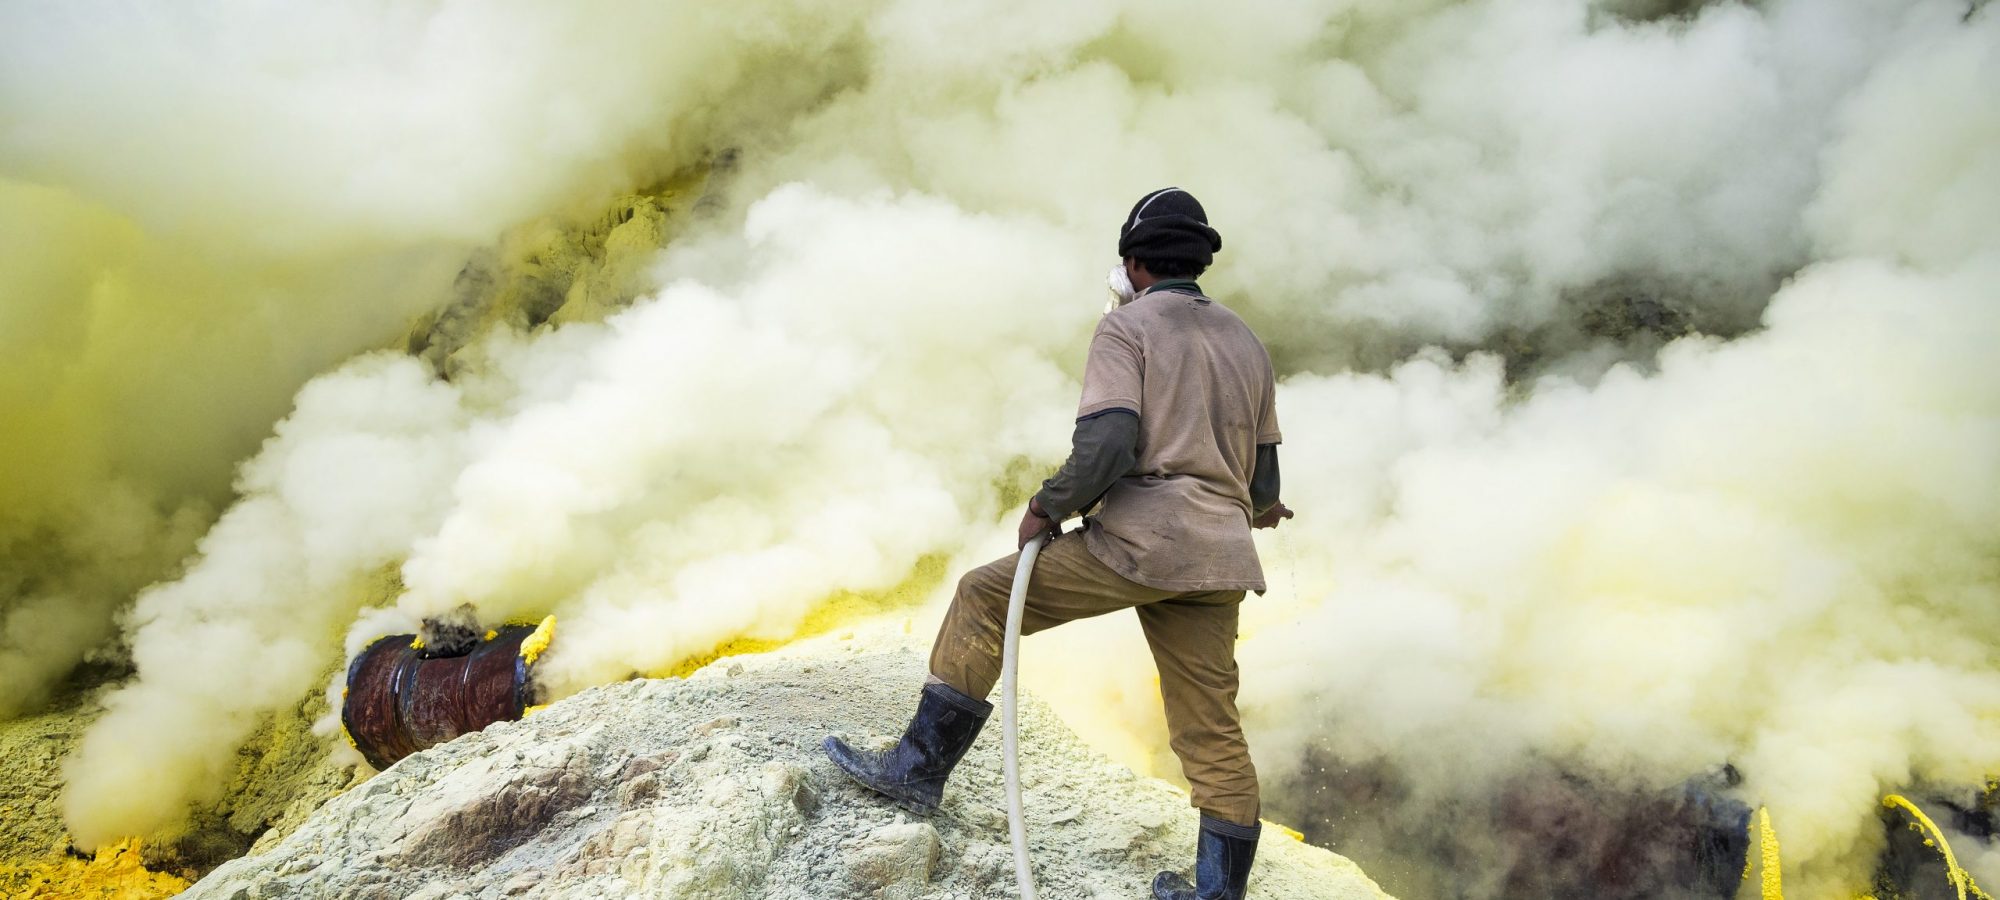 Kawah Ijen Volcano, East Java, Indonesia - May 25, 2013: Sulfur miner spraying water onto pipes inside the crater of Kawah Ijen volcano in East Java, Indonesia..